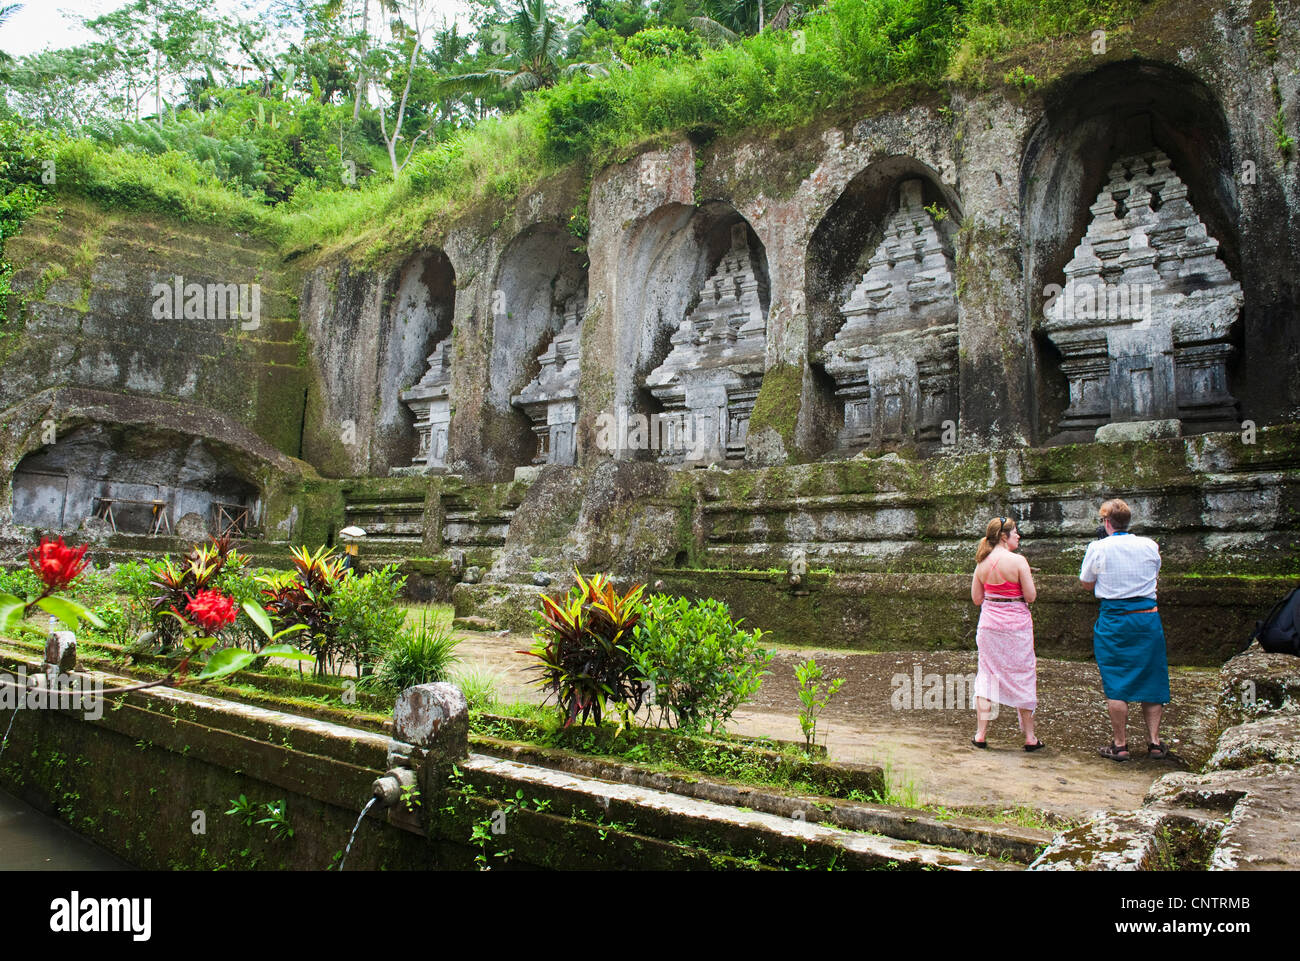 Gunung Kawi is an 11th century temple complex in Tampaksiring north east of Ubud in Bali, Indonesia. Stock Photo